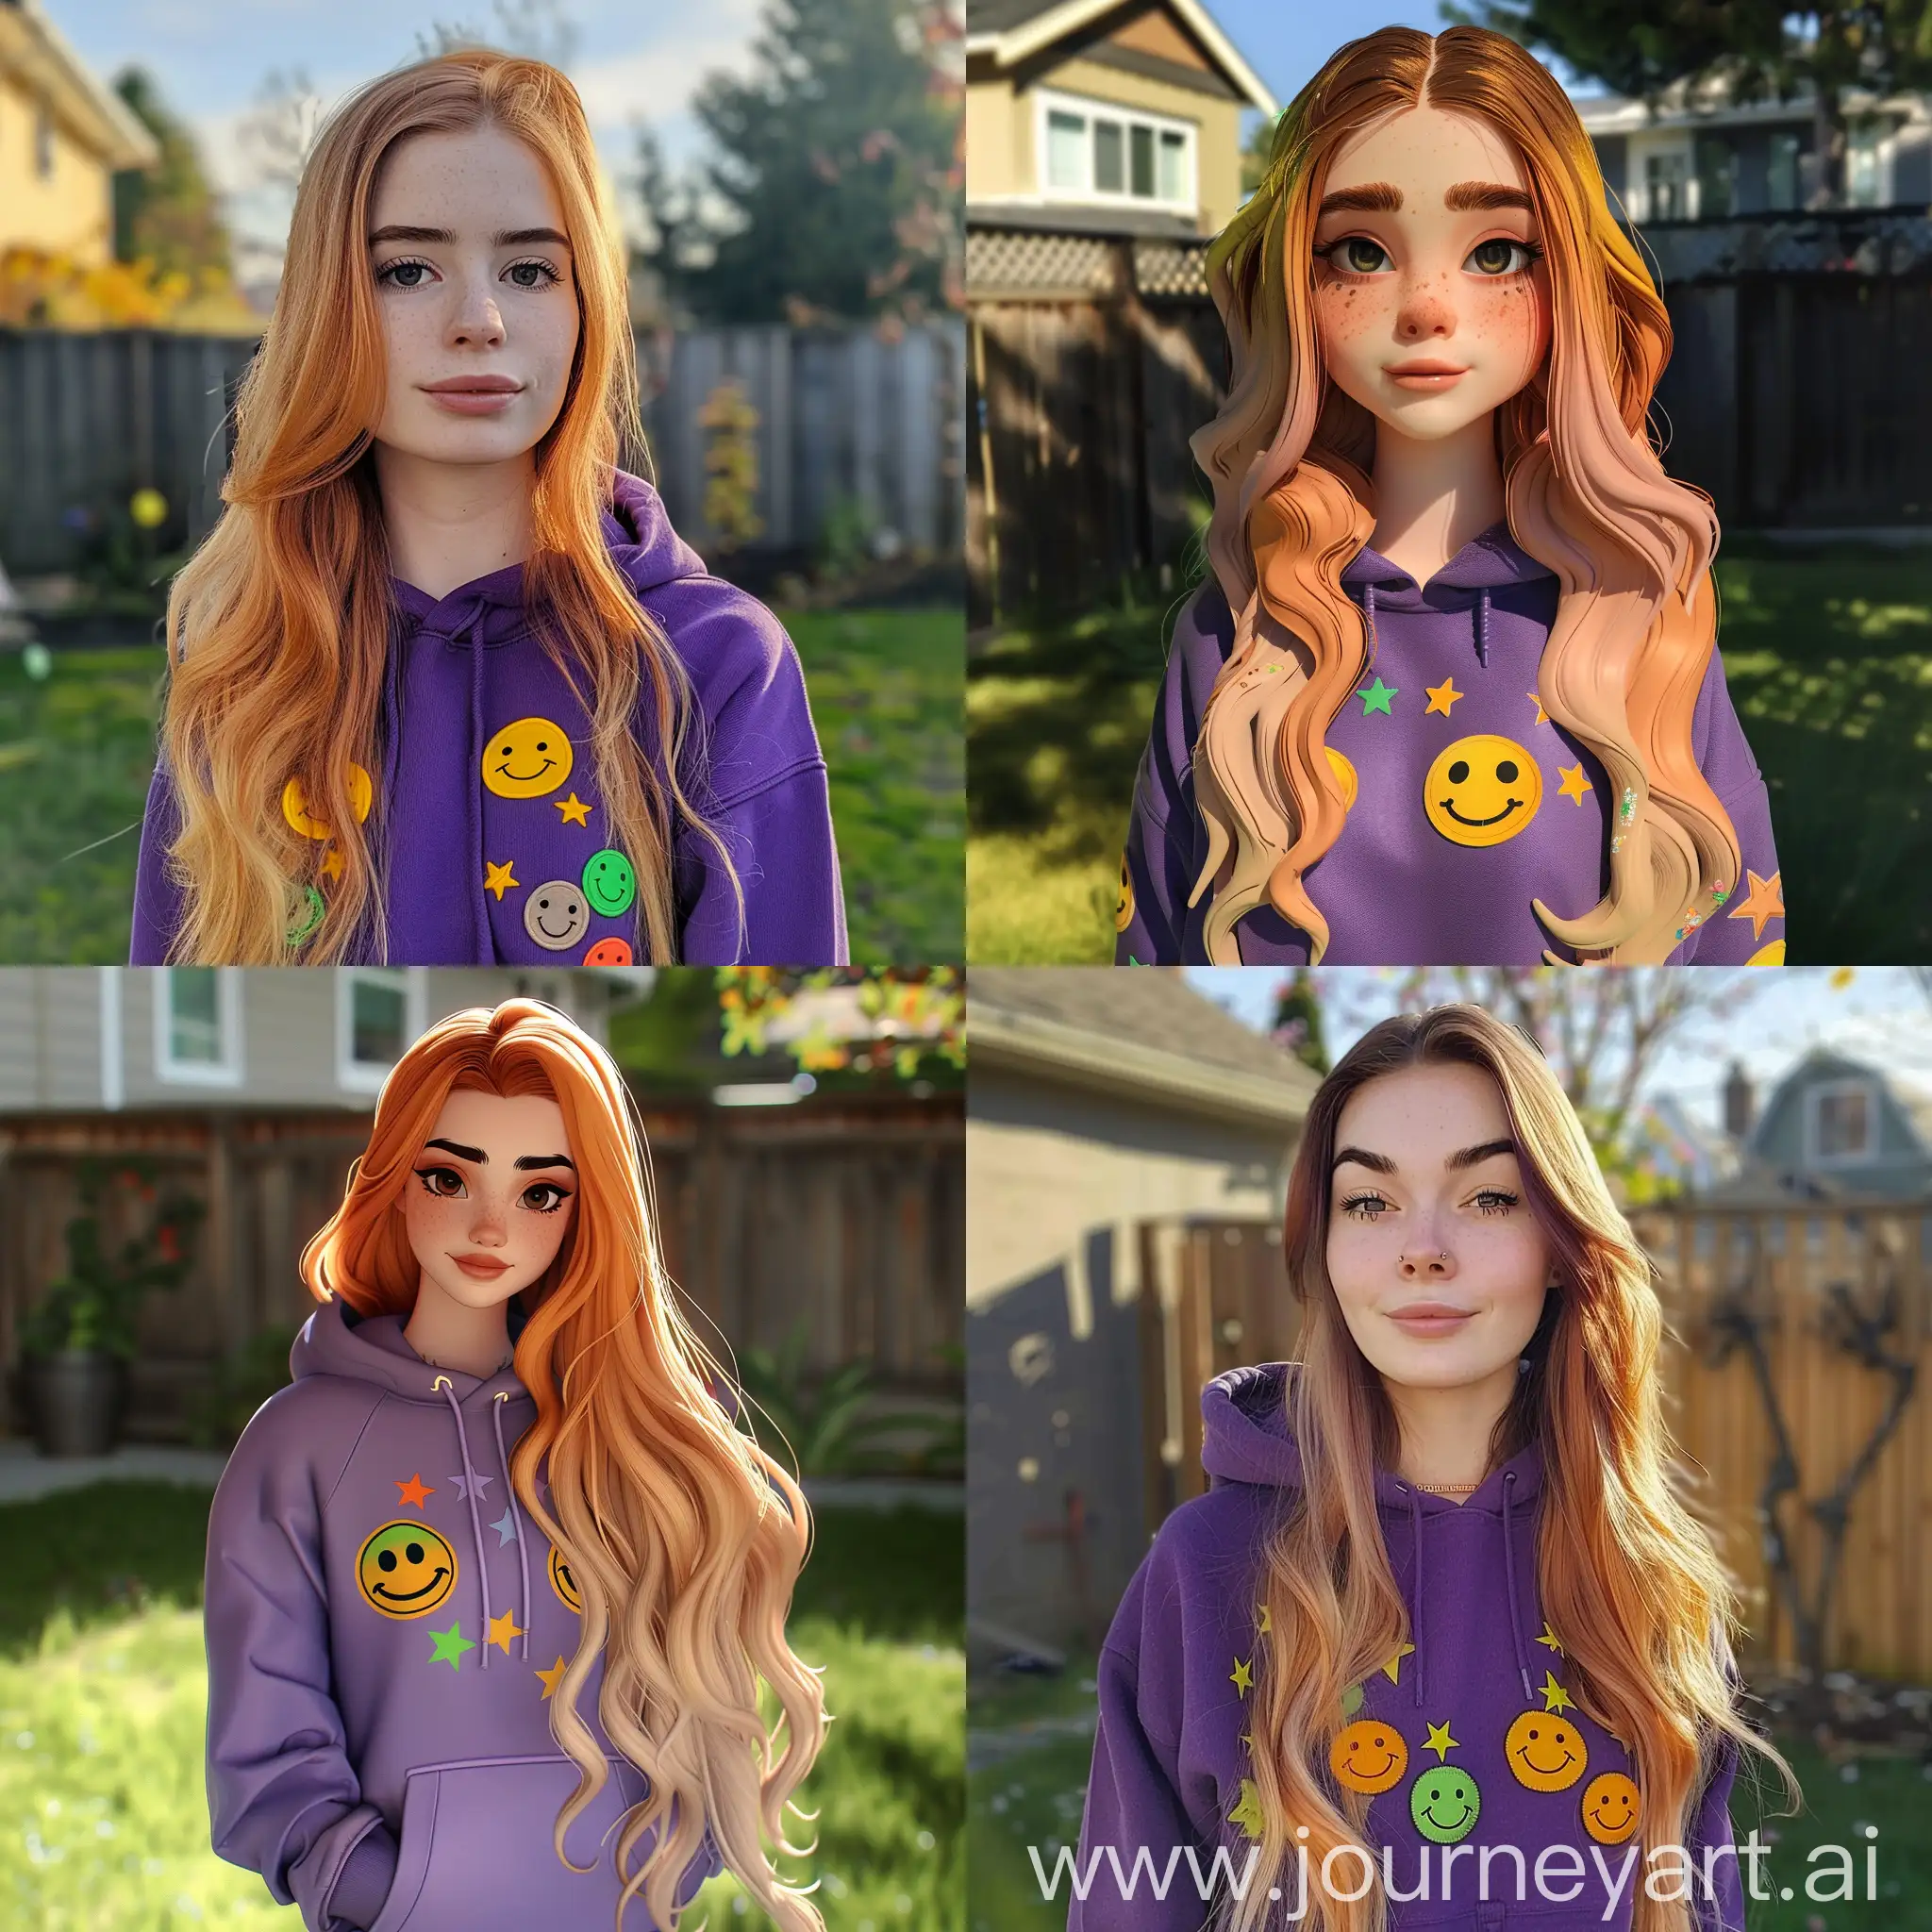 In the style of a cute cartoon, saturday afternoon cartoon style. A young 25 year old woman, attractive, cute. She has waist length long flowing hair that is blonde at the top and fades to ginger at the tips. She has dark eyebrows, cute nose, pale lips. She is wearing a purple hoodie with yellow smiley faces and green and orange star patches. She is TINY. She is standing outside in a backyard and only 1 inch tall, like the movie "Honey I Shrunk the Kids"